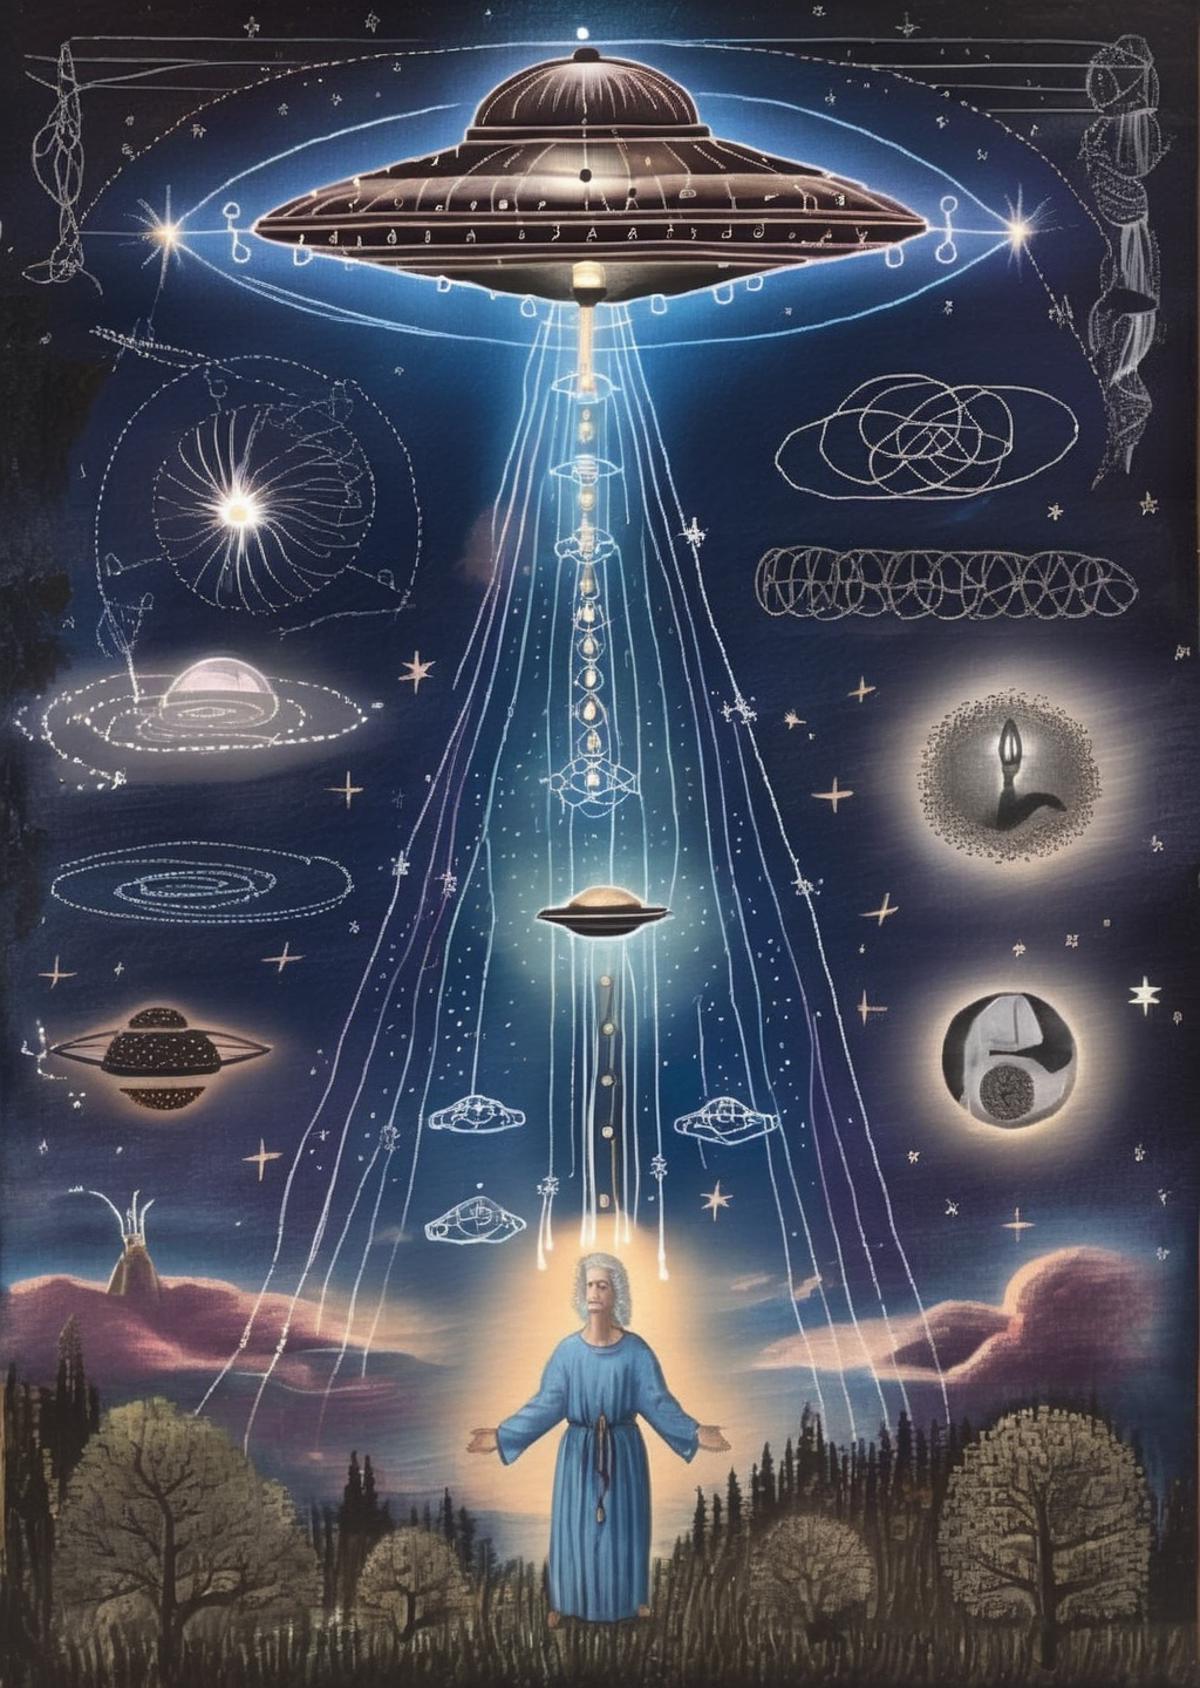 A painting of a person surrounded by various celestial objects such as planets, stars, and a space station.